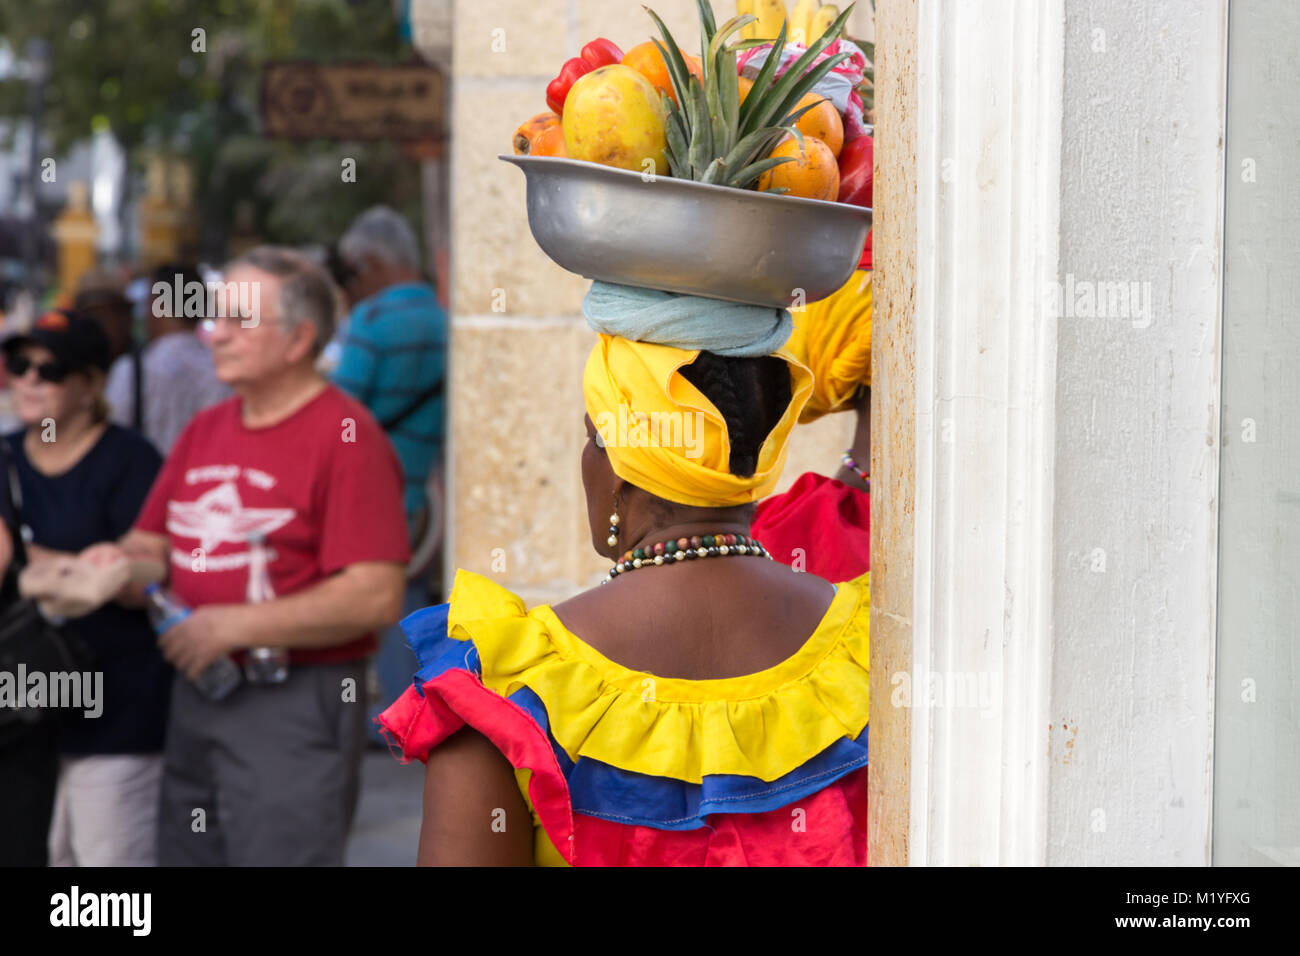 Cartagena, Colombia - January 23th, 2018: rear view of a fruit vendor palenquera with a metal basket with fruits on her head waiting for clients at th Stock Photo